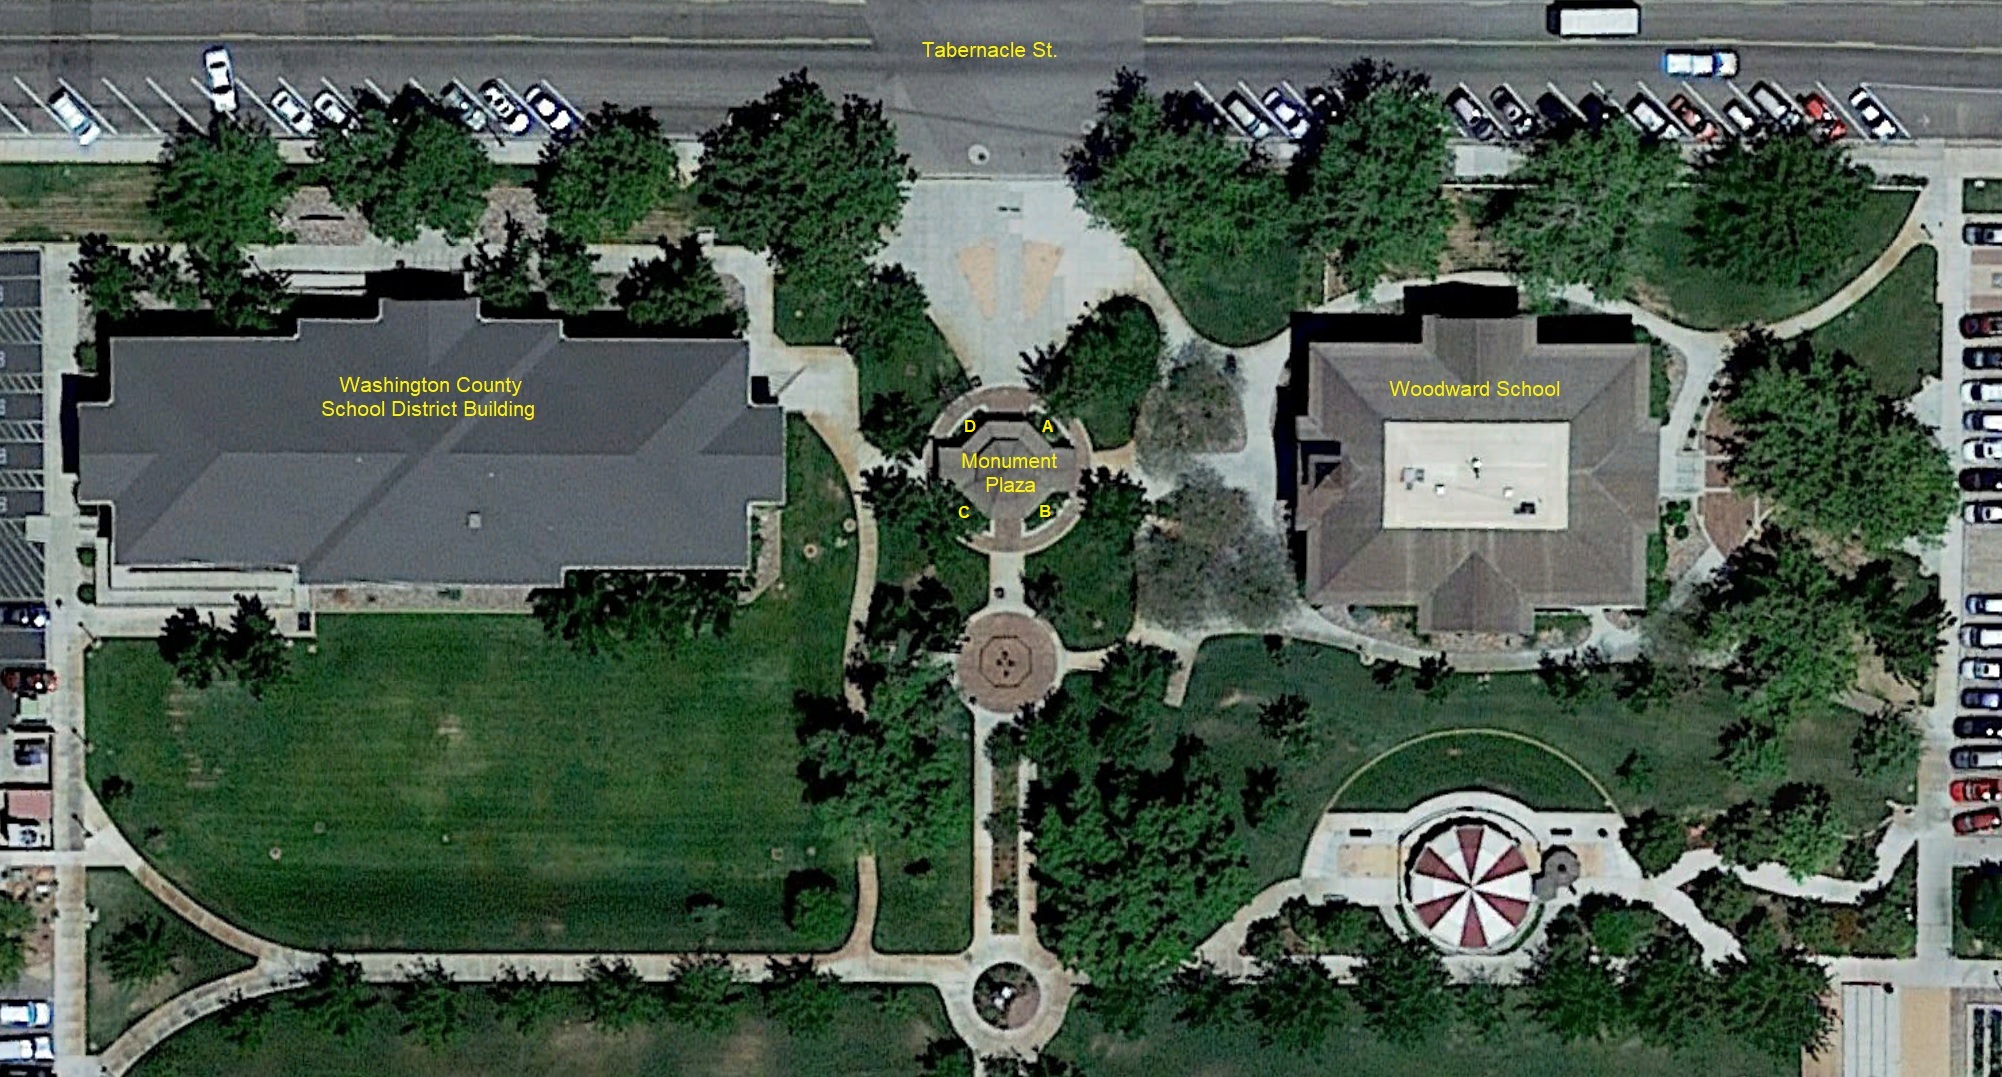 Aerial view of the Monument Plaza area